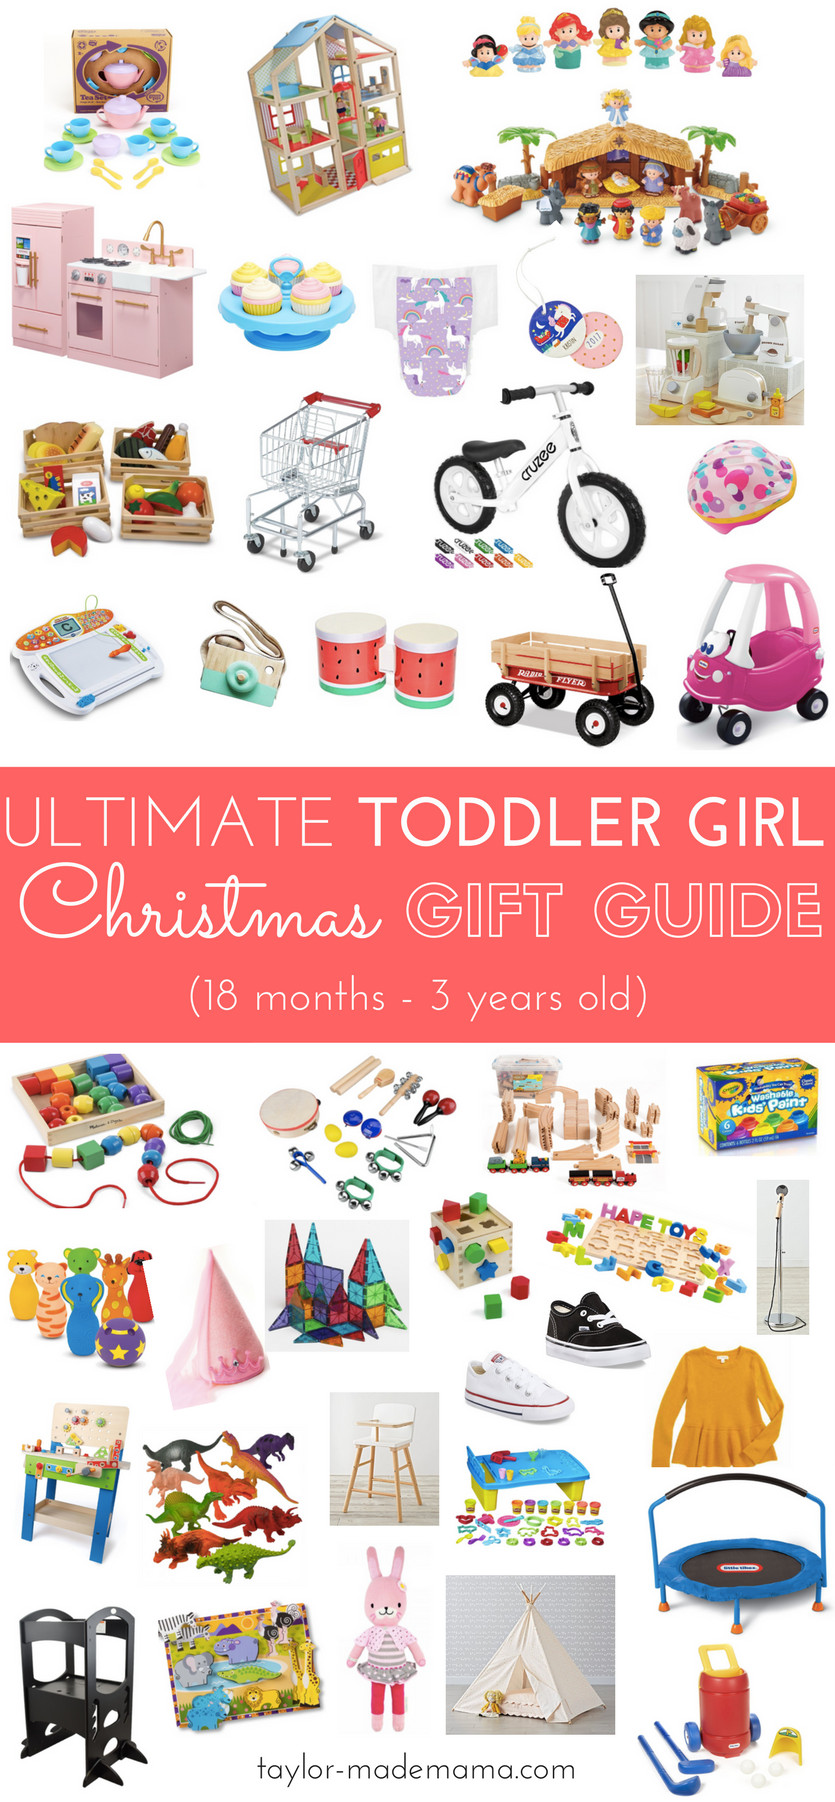 Christmas Gift Ideas For 18 Month Old Girl
 The Ultimate Toddler Girl Gift Guide For Christmas 18